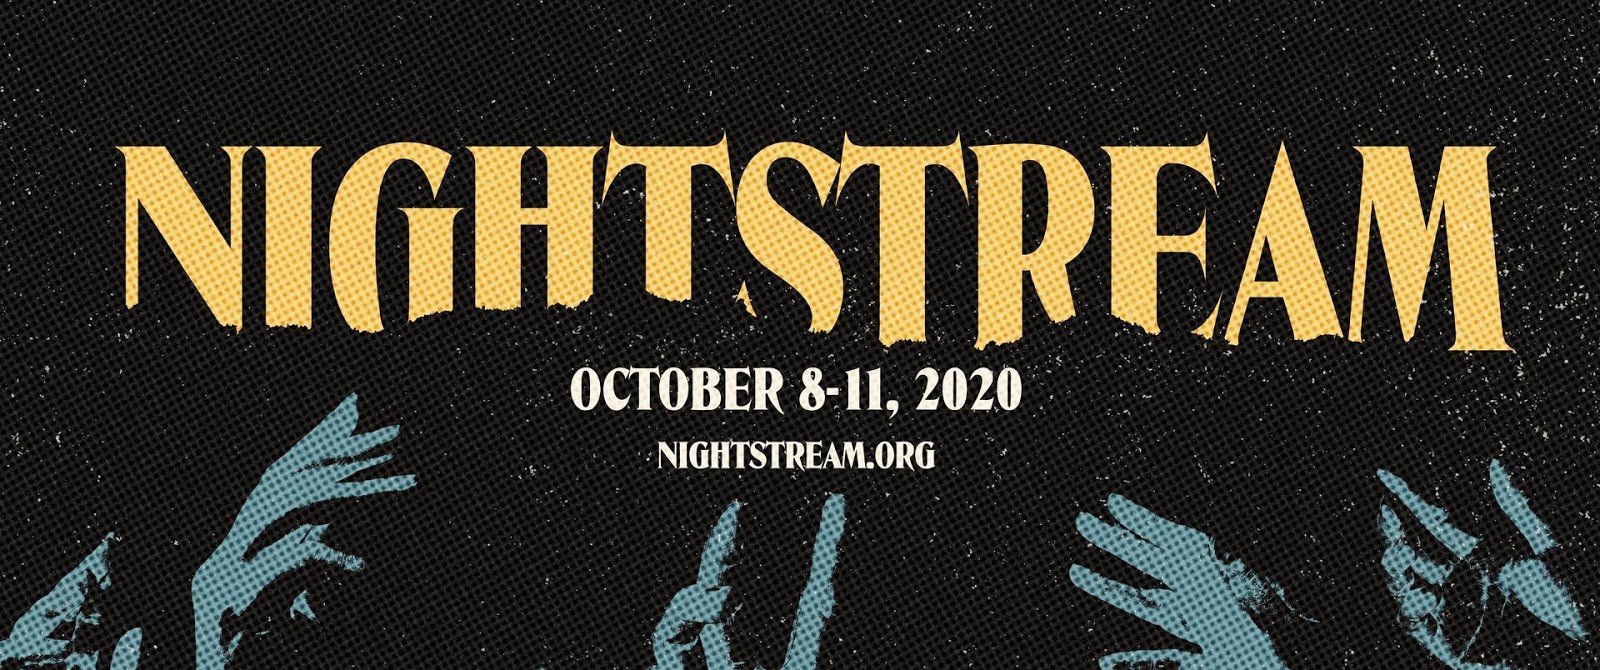 NIGHTSTREAM 2020 | October 8th to 11th, 2020.